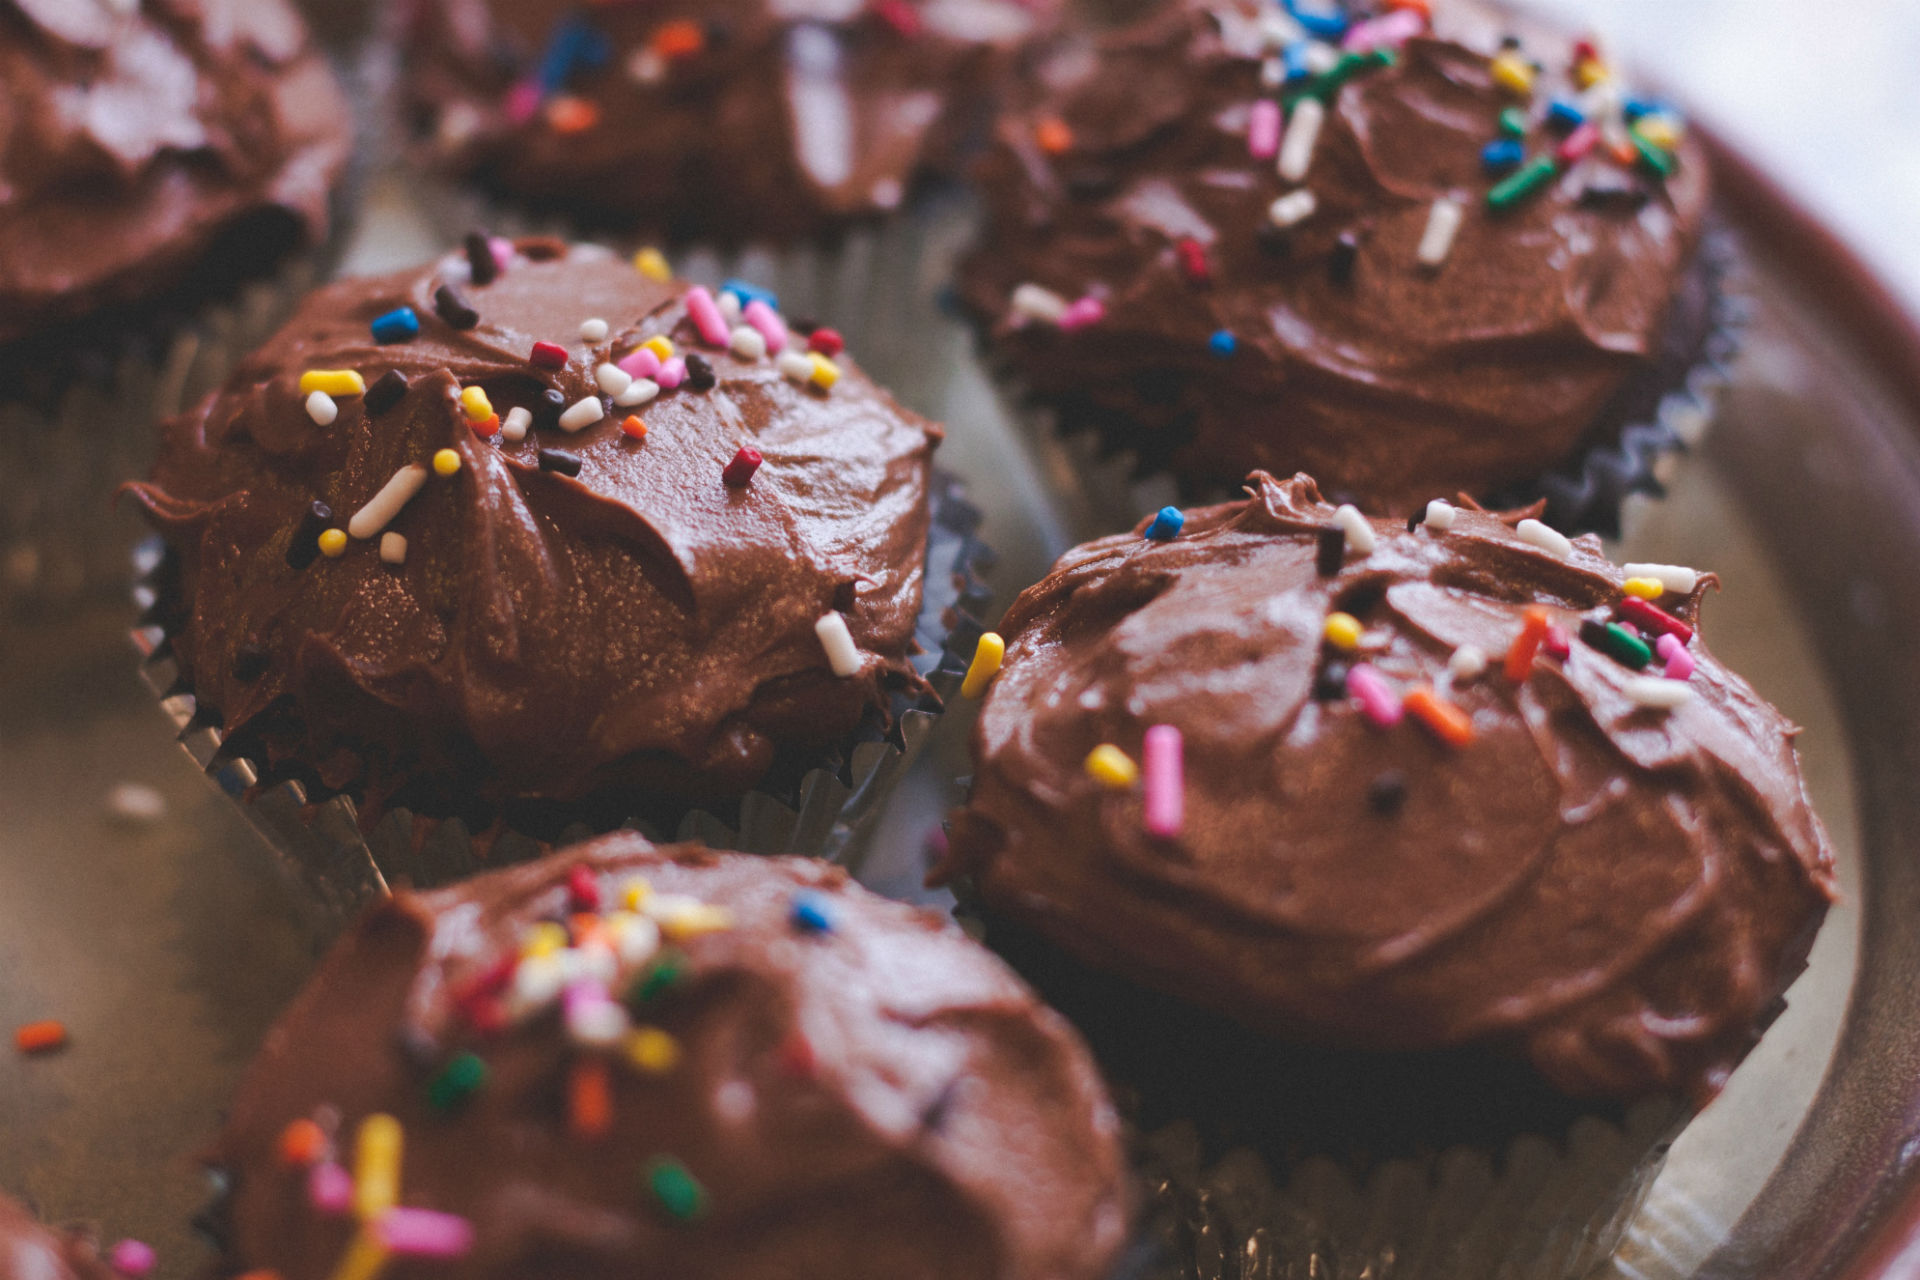 tray of chocolate cupcakes with chocolate icing and sprinkles